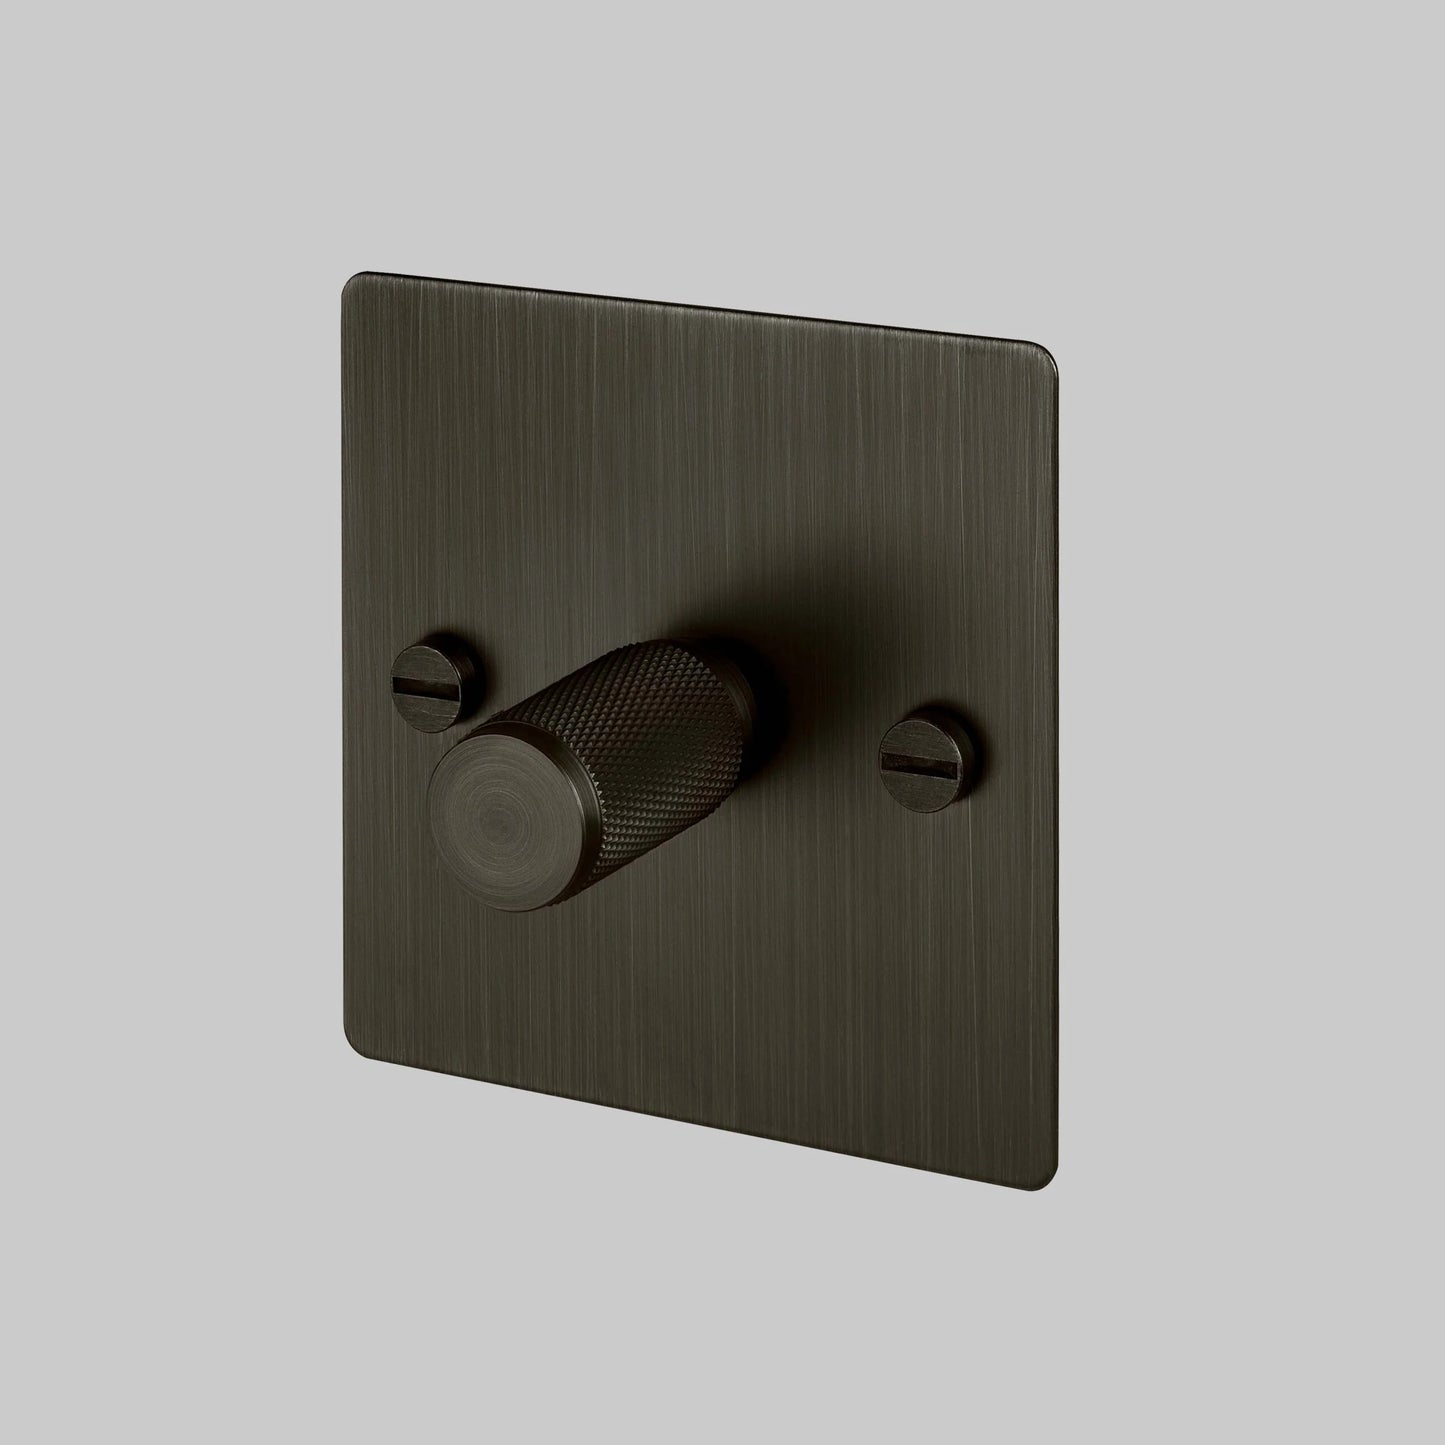 1G Dimmer/ 100W/ Smoked Bronze with smoked bronze details, angled view.